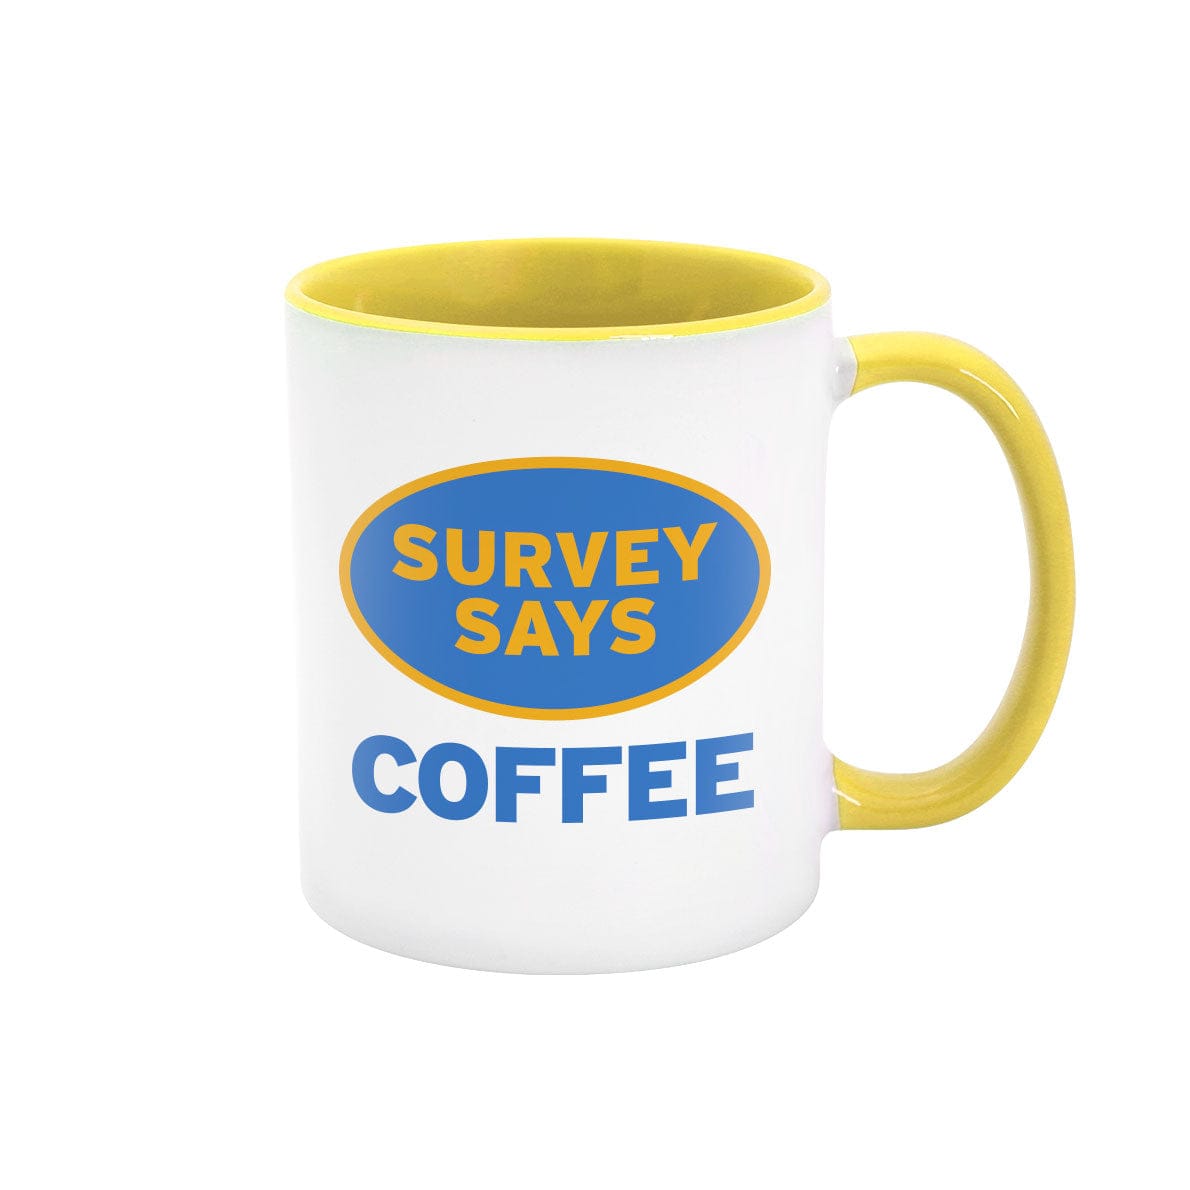 Survey Says Coffee 11oz Mug with Yellow Accents